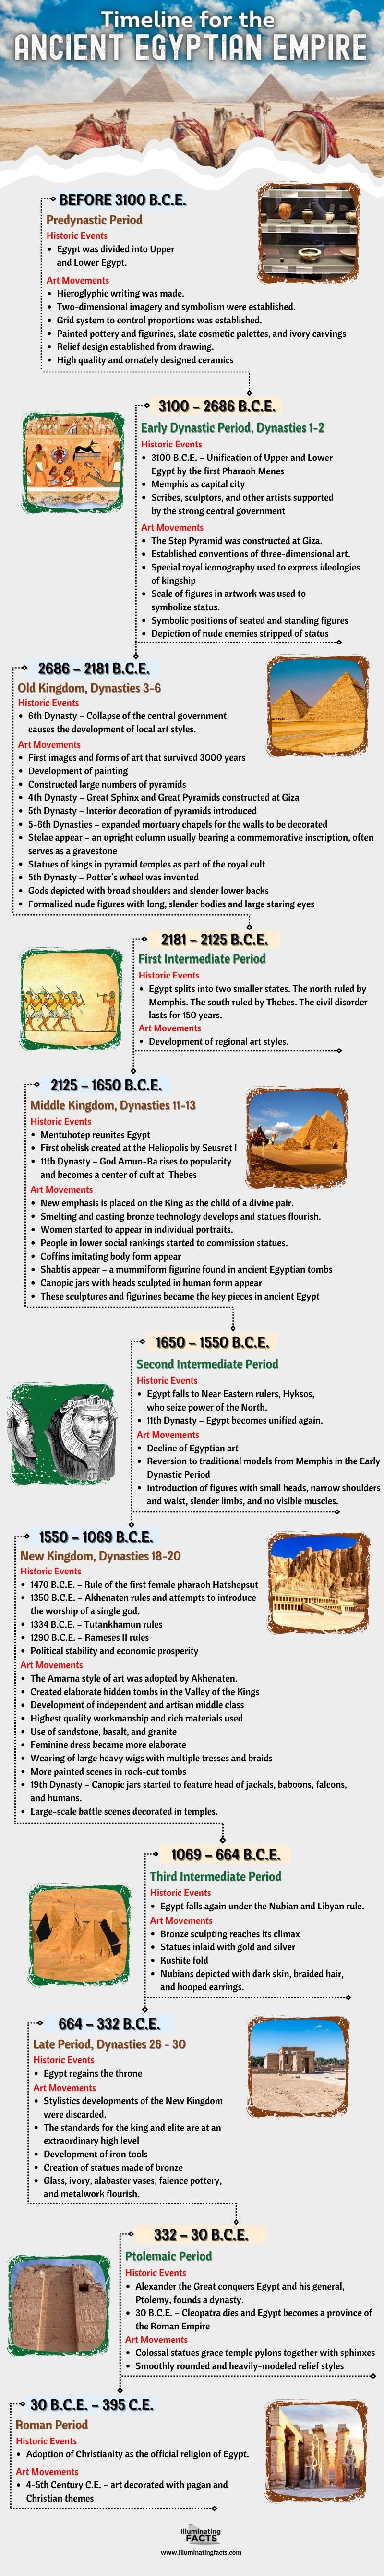 Timeline for the Ancient Egyptian Empire